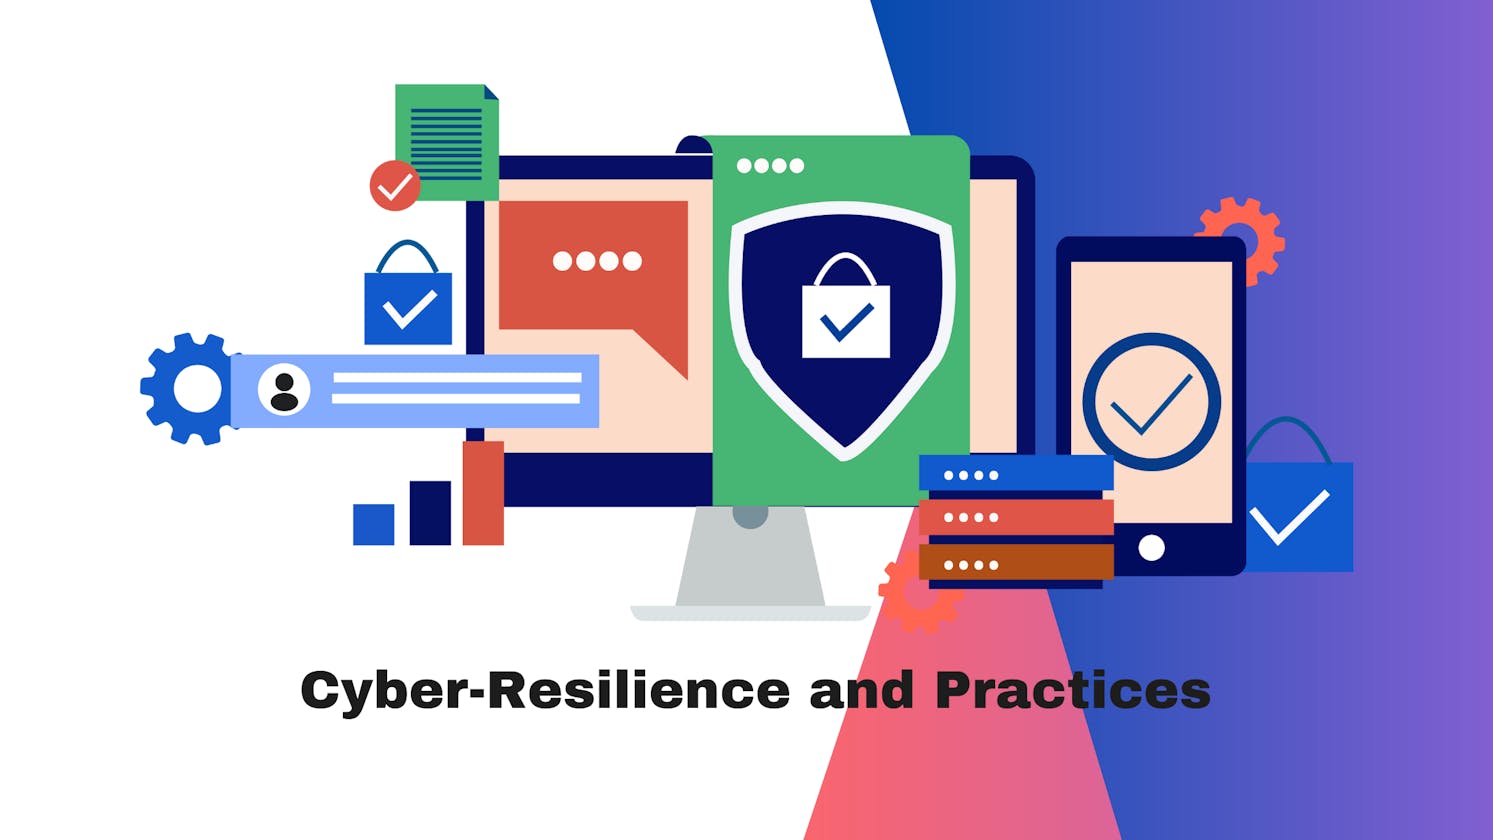 Building Cyber-Resilience: 6 Approaches with NIST CSF